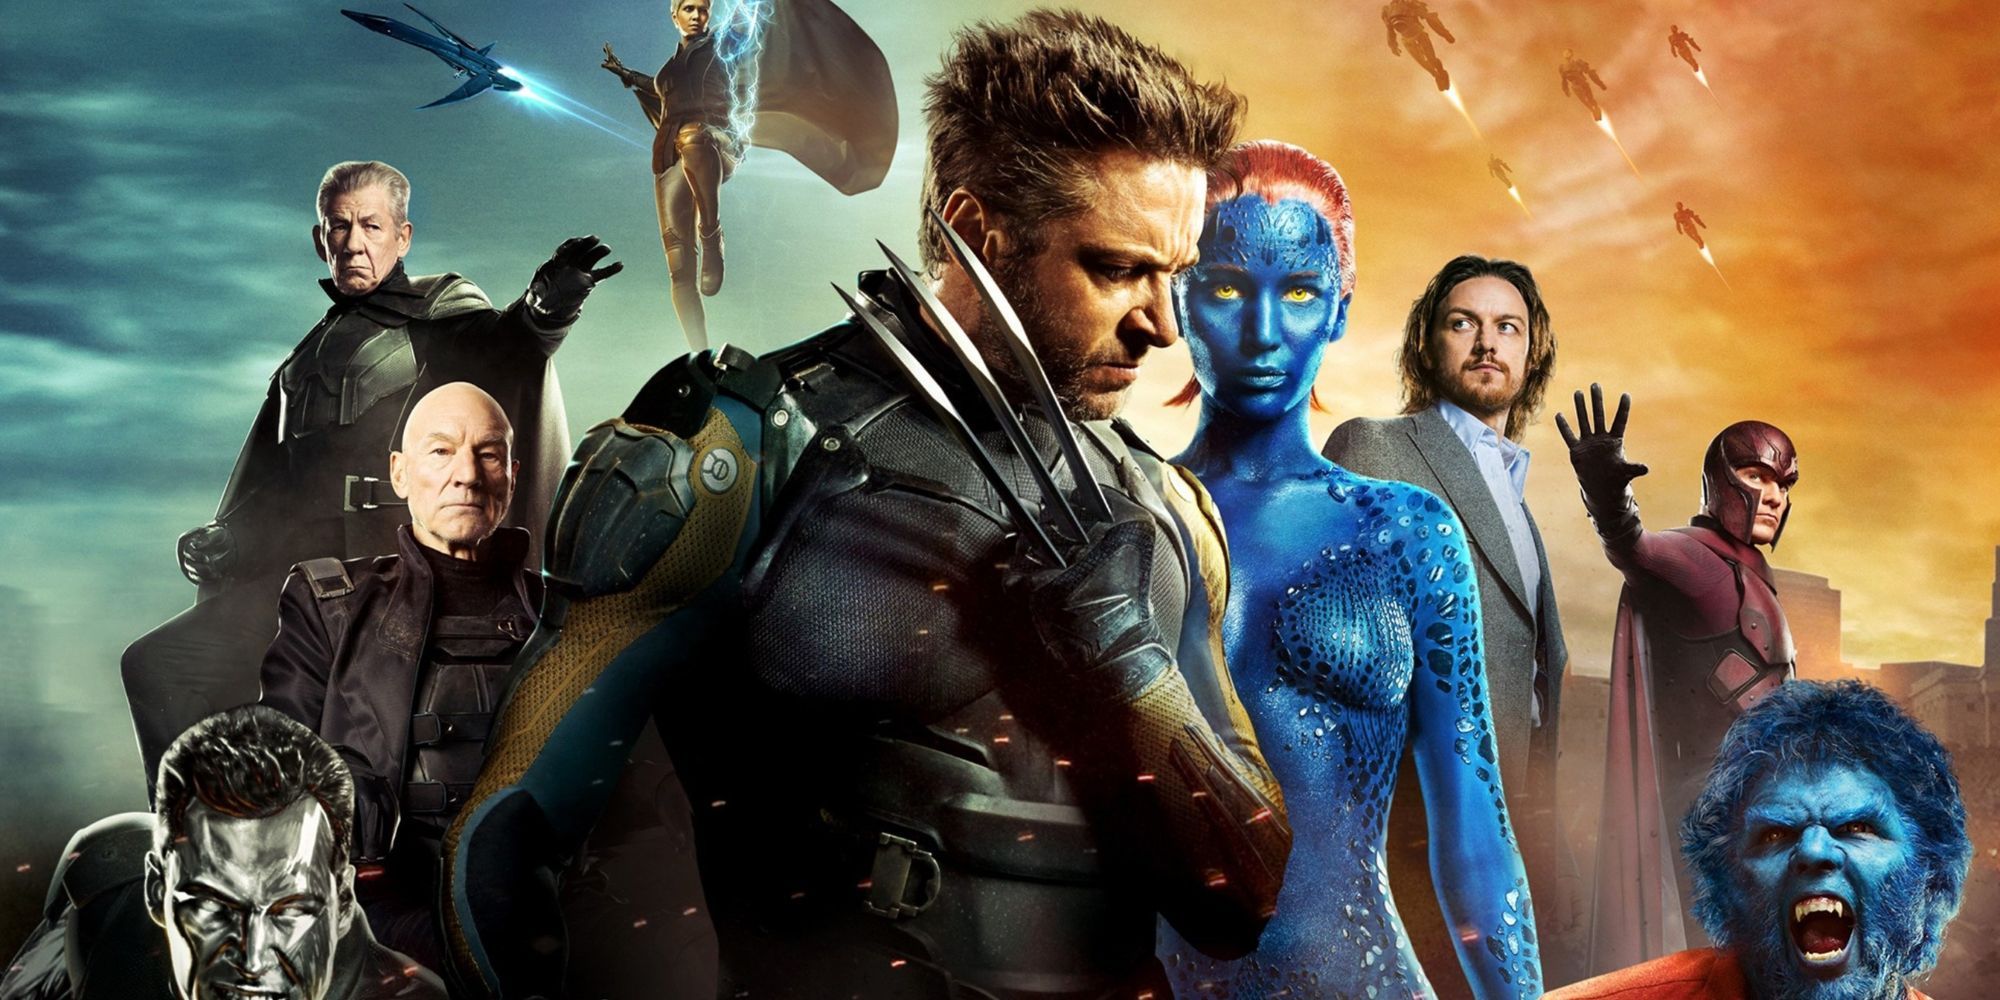 Promotional image for 'X-Men: Days of Future Past'